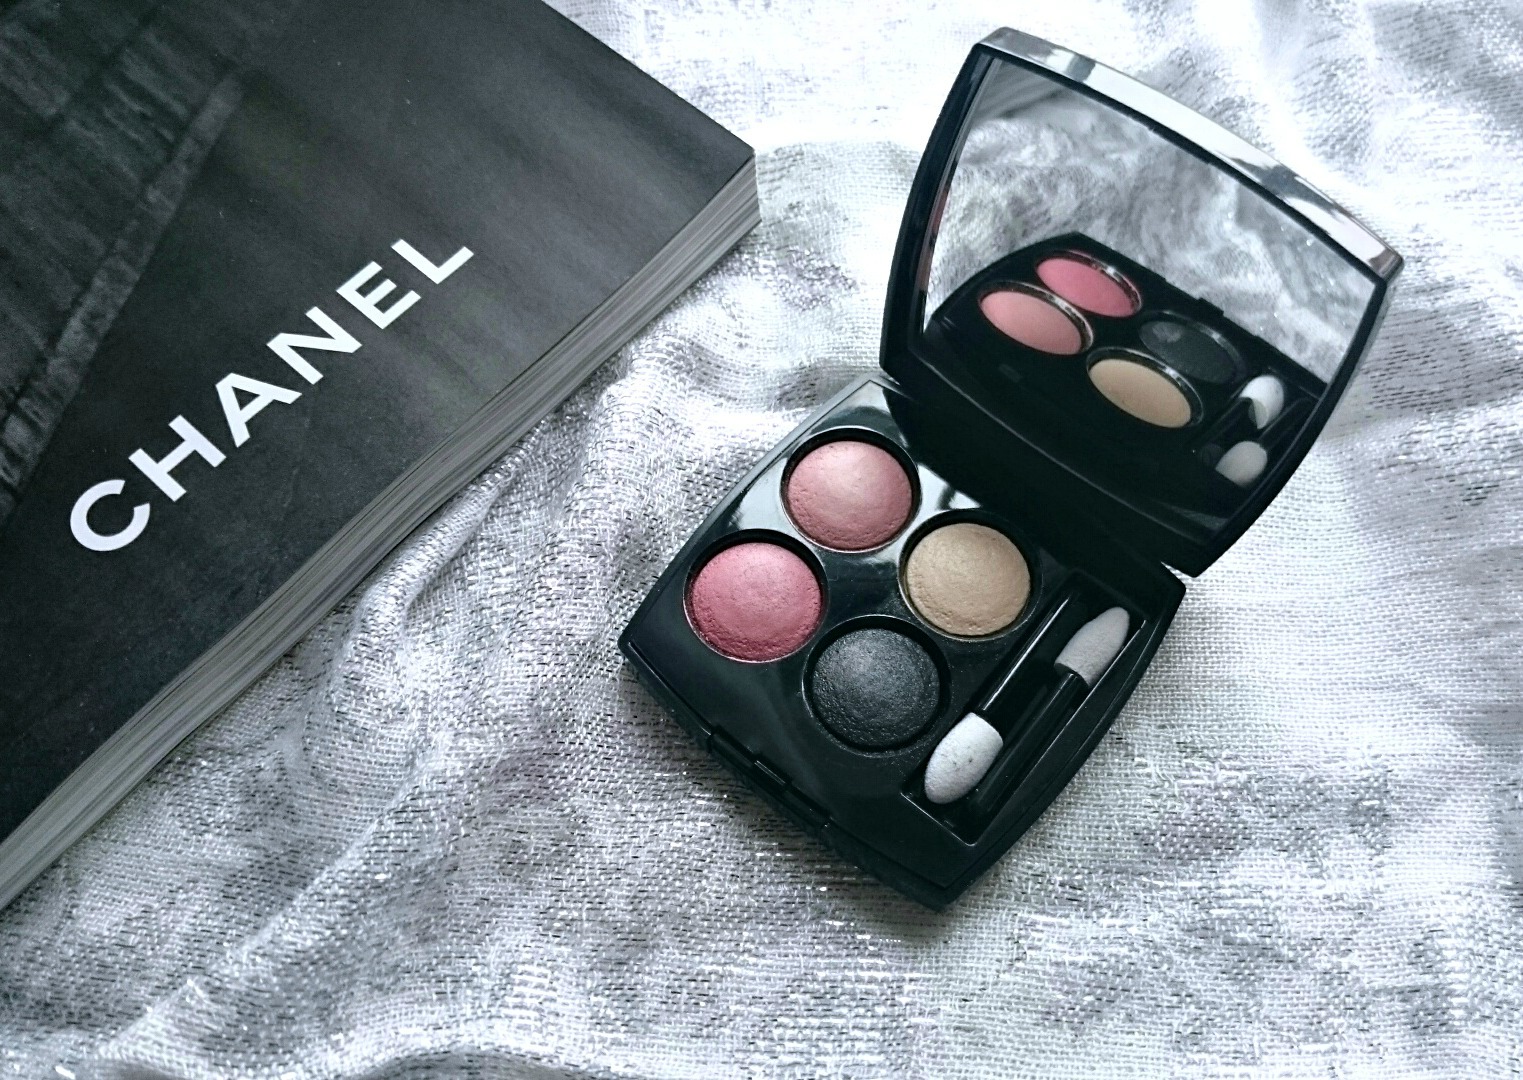 Chanel Les 4 Ombres #238 Tisse Paris - review and swtaches | Mummy's ...